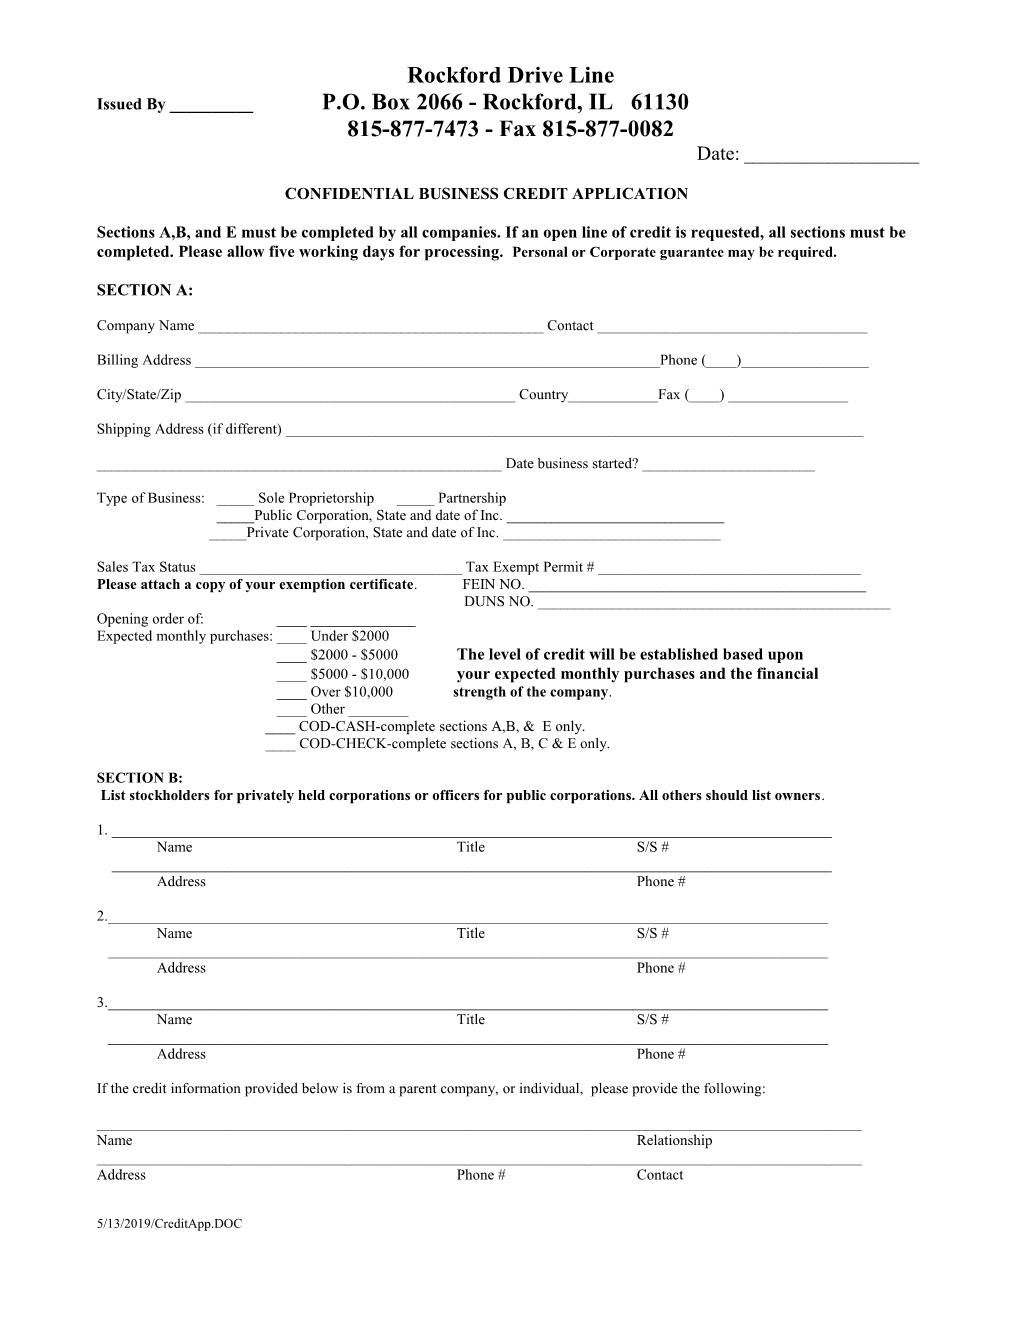 Confidential Business Credit Application